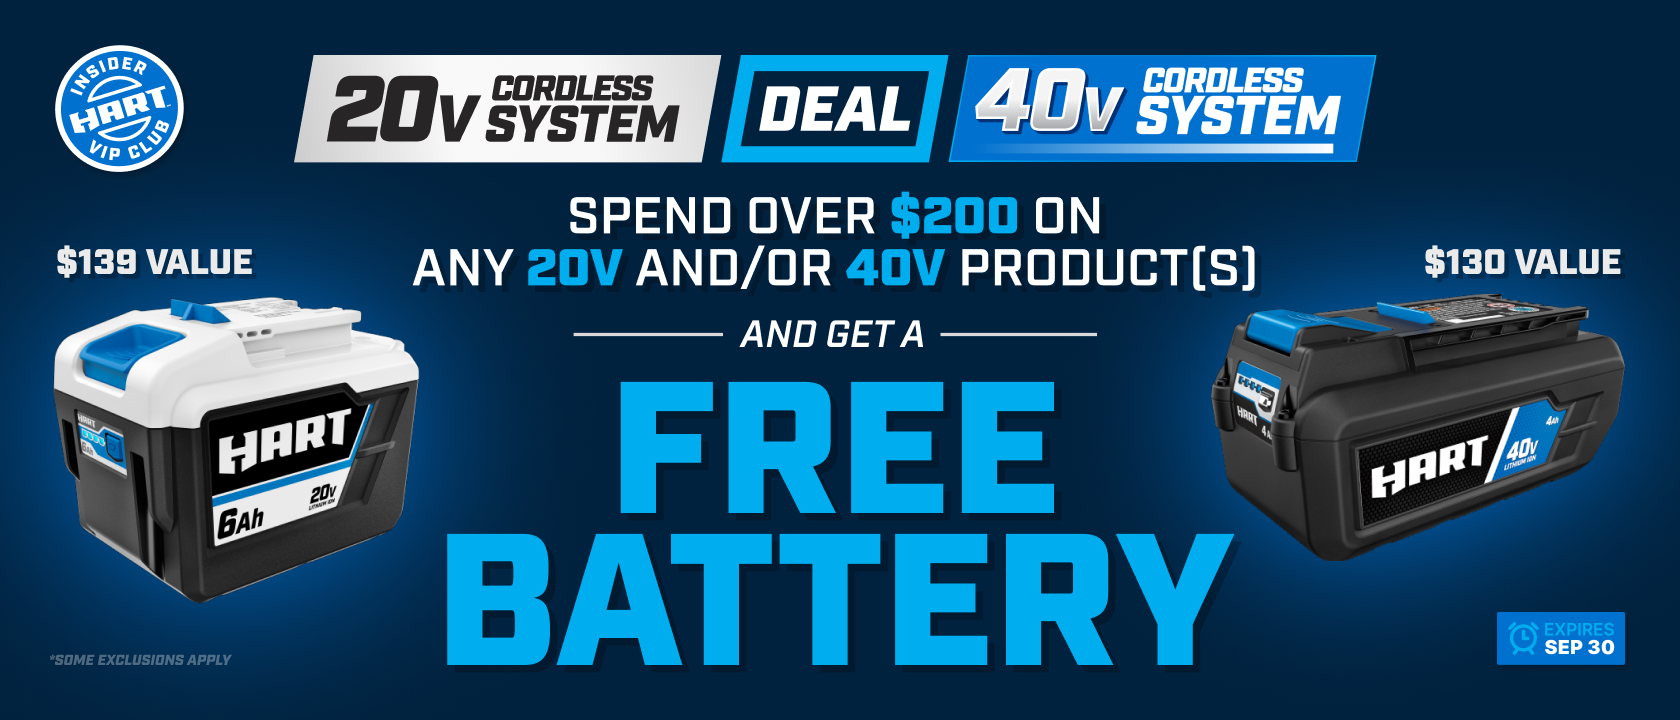 Purchase any new 20V Hybrid Light and get a free battery